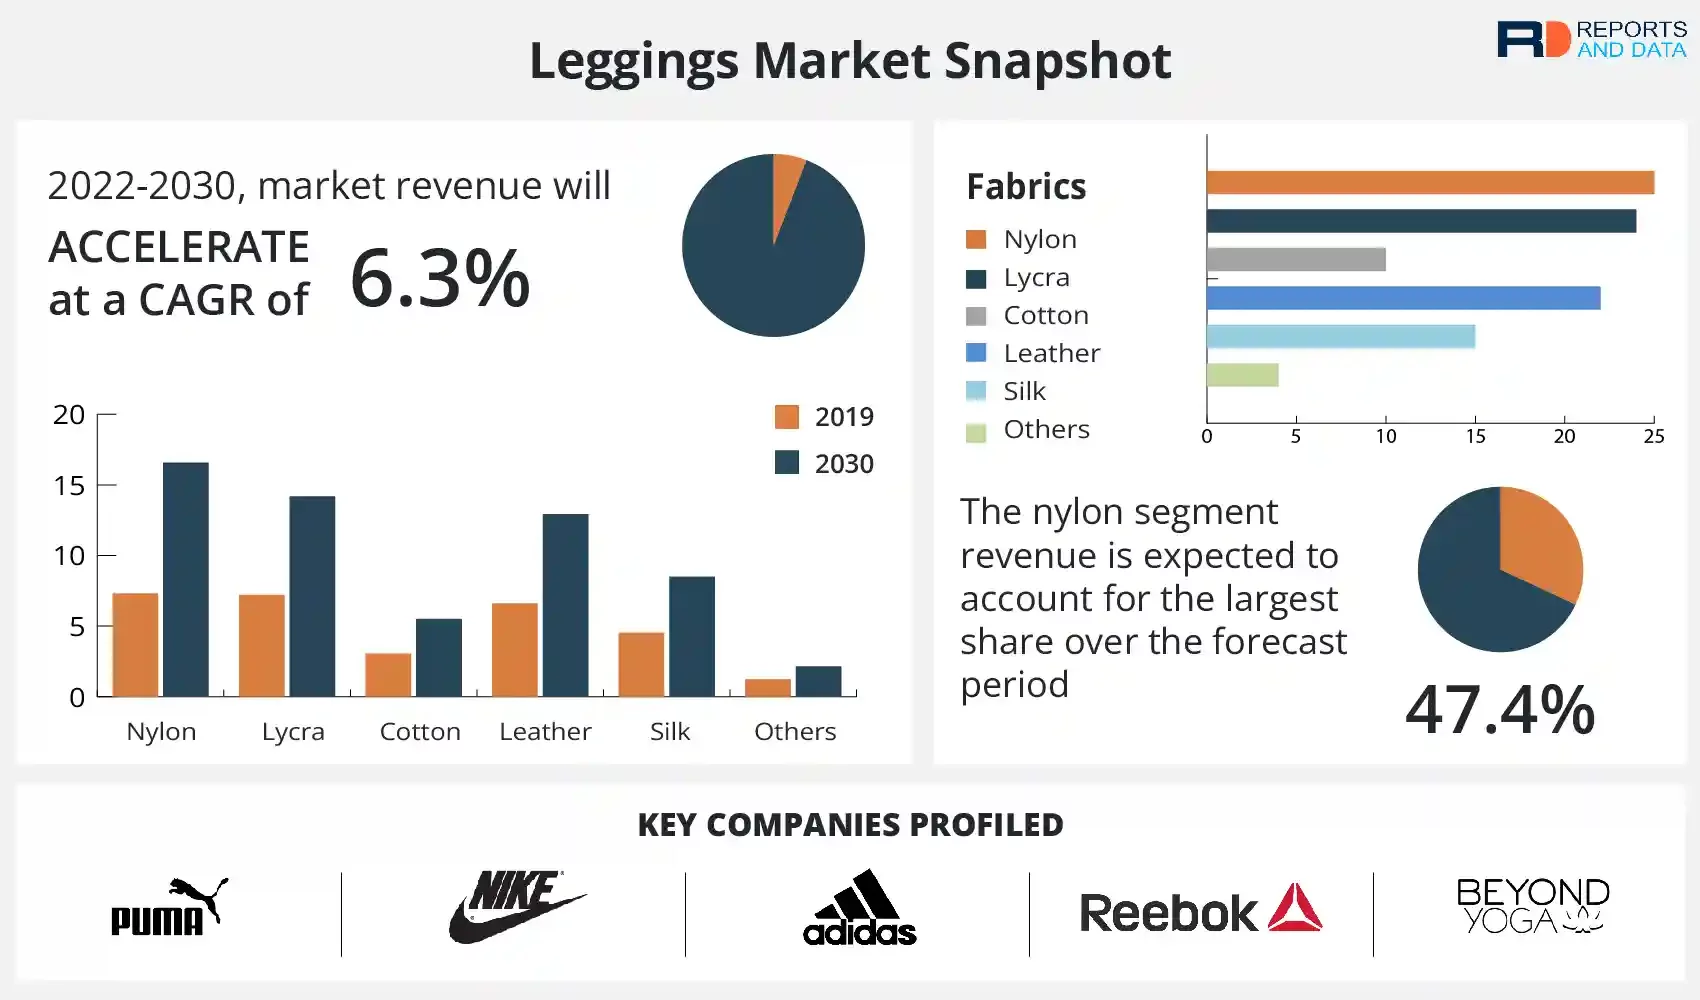 Are Leggings Good for Dropshipping?